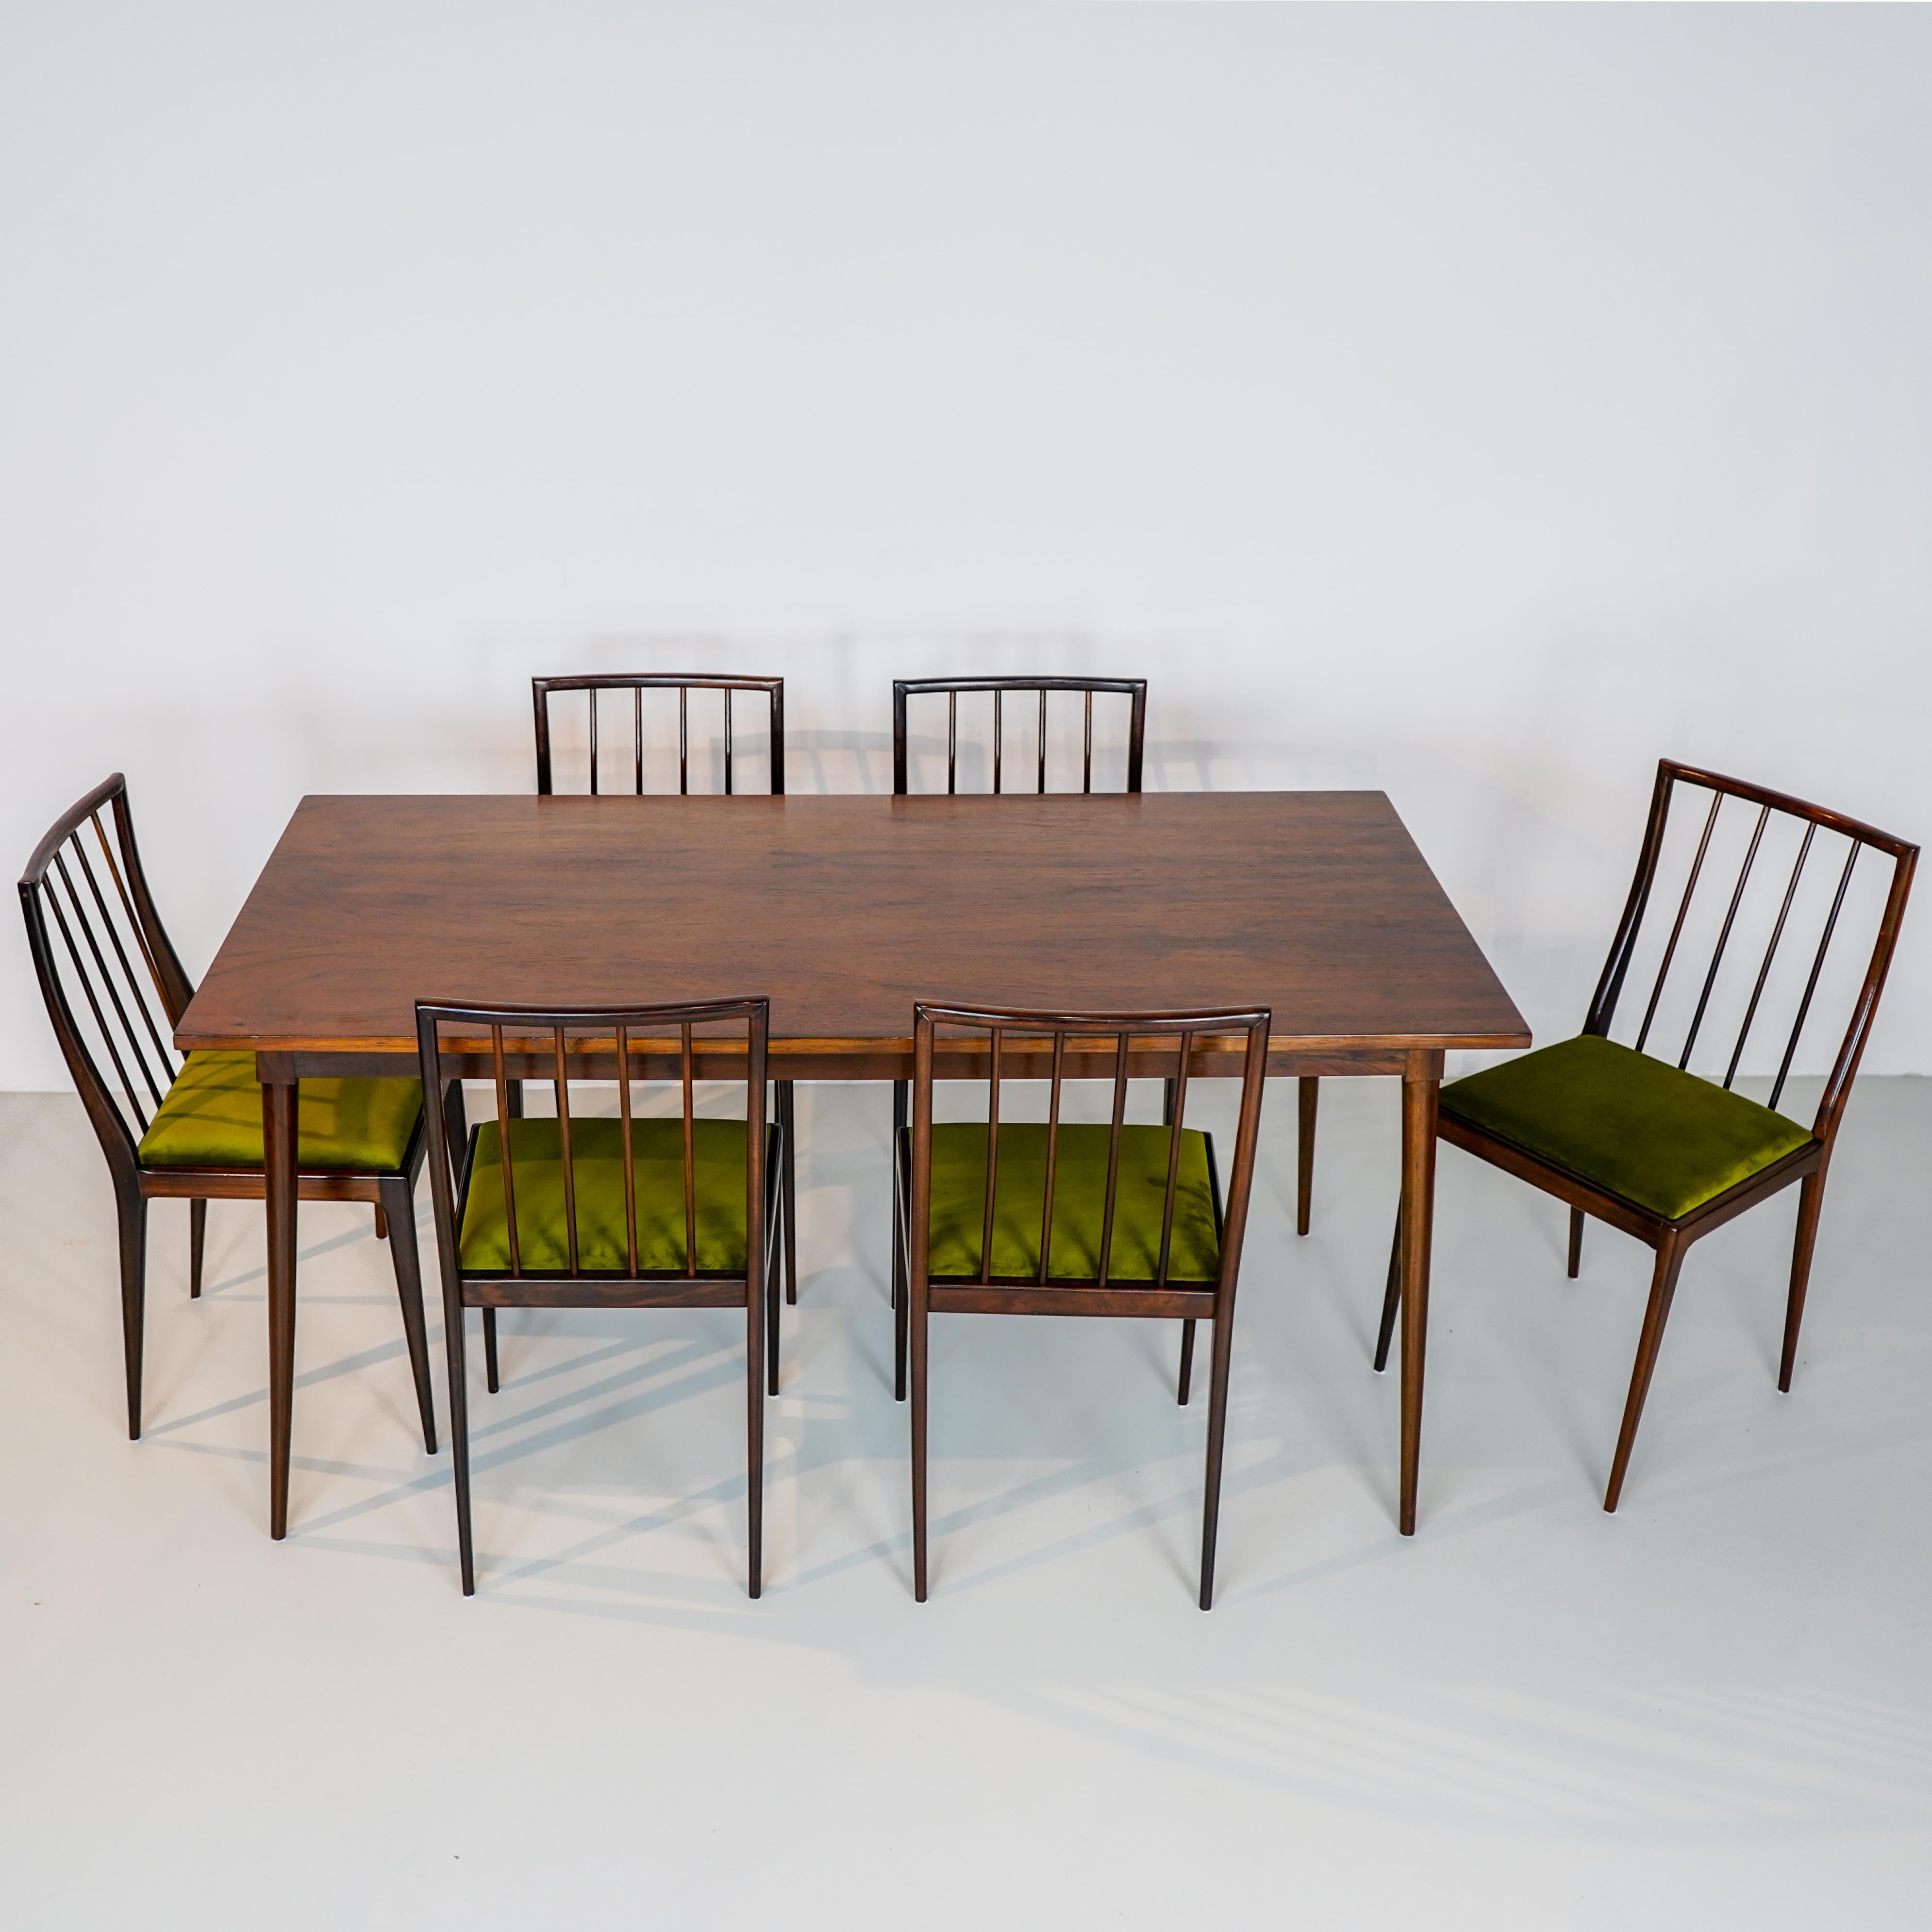 GB01 RIPAS - 6 chairs and sealed table in Rosewood, Geraldo de Barro Unilabor For Sale 1